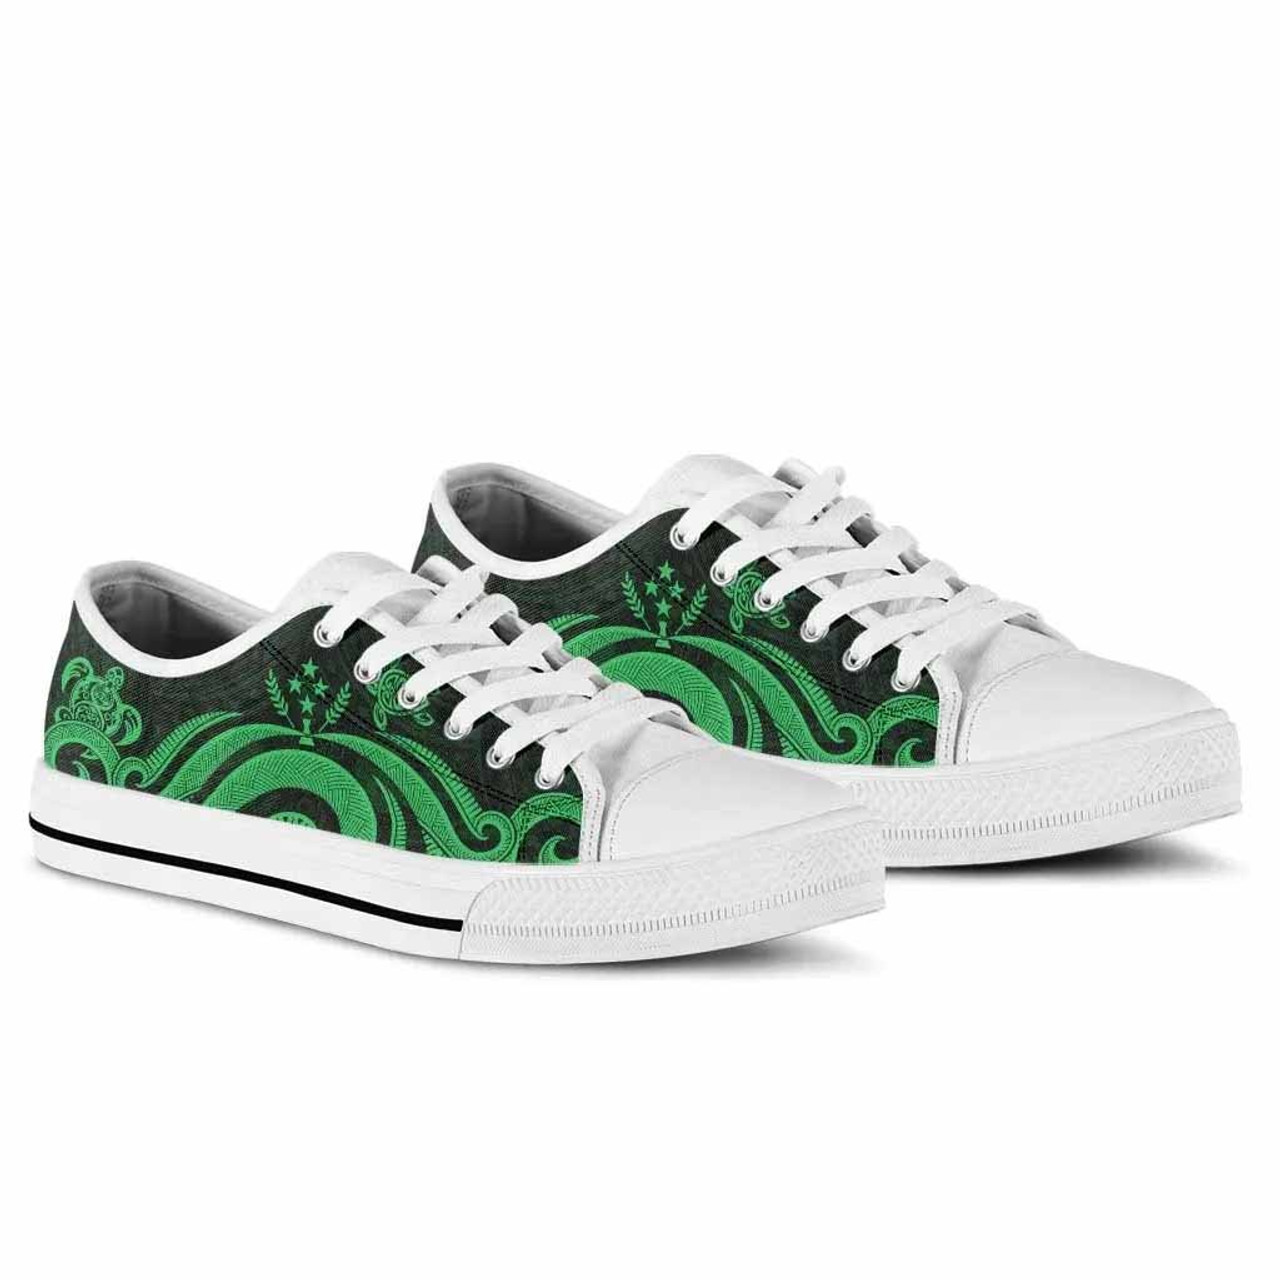 Kosrae Low Top Canvas Shoes - Green Tentacle Turtle 6